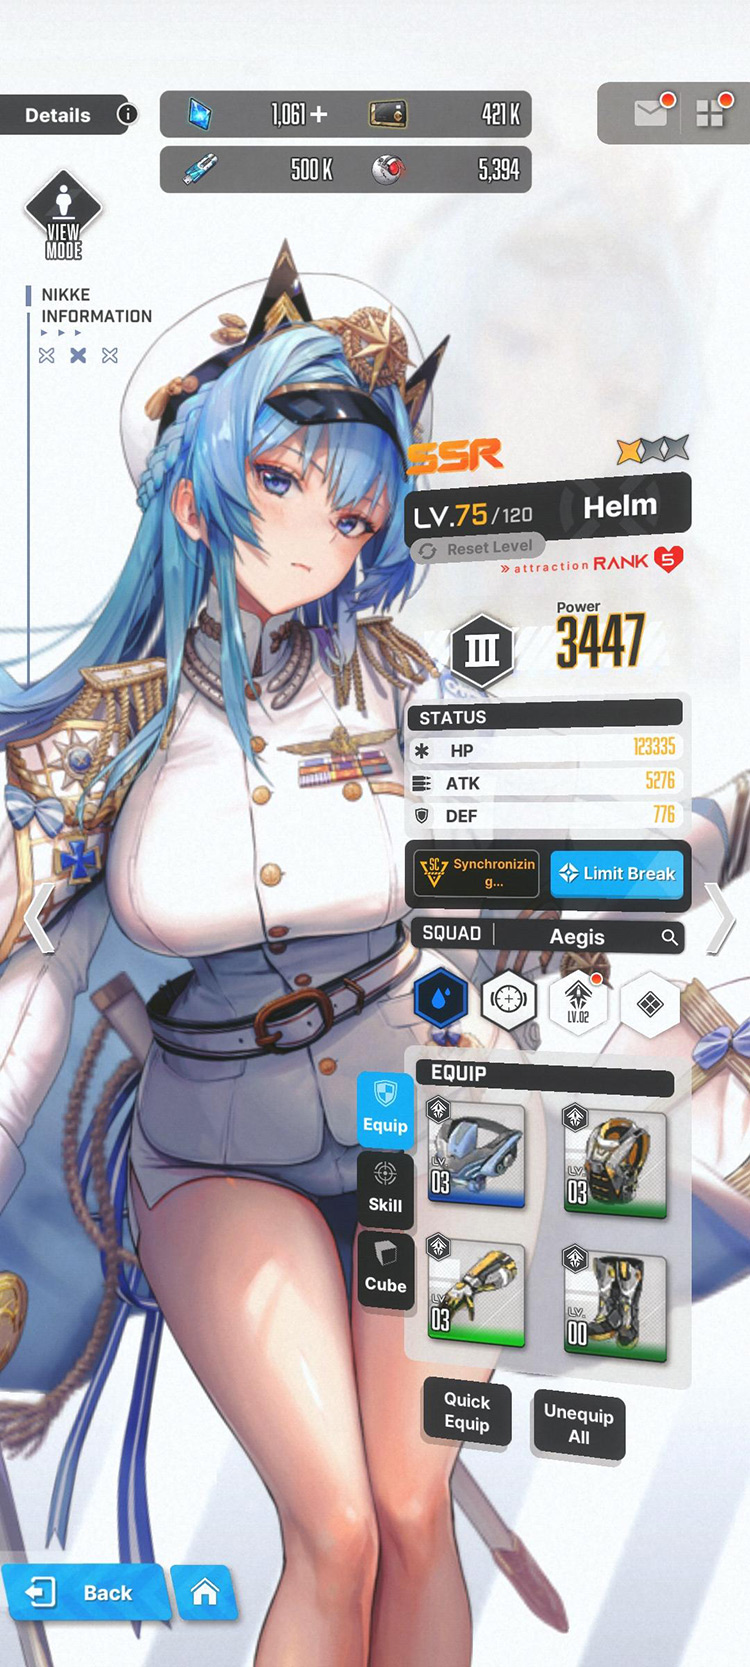 Helm (Character Page) / Goddess of Victory: Nikke